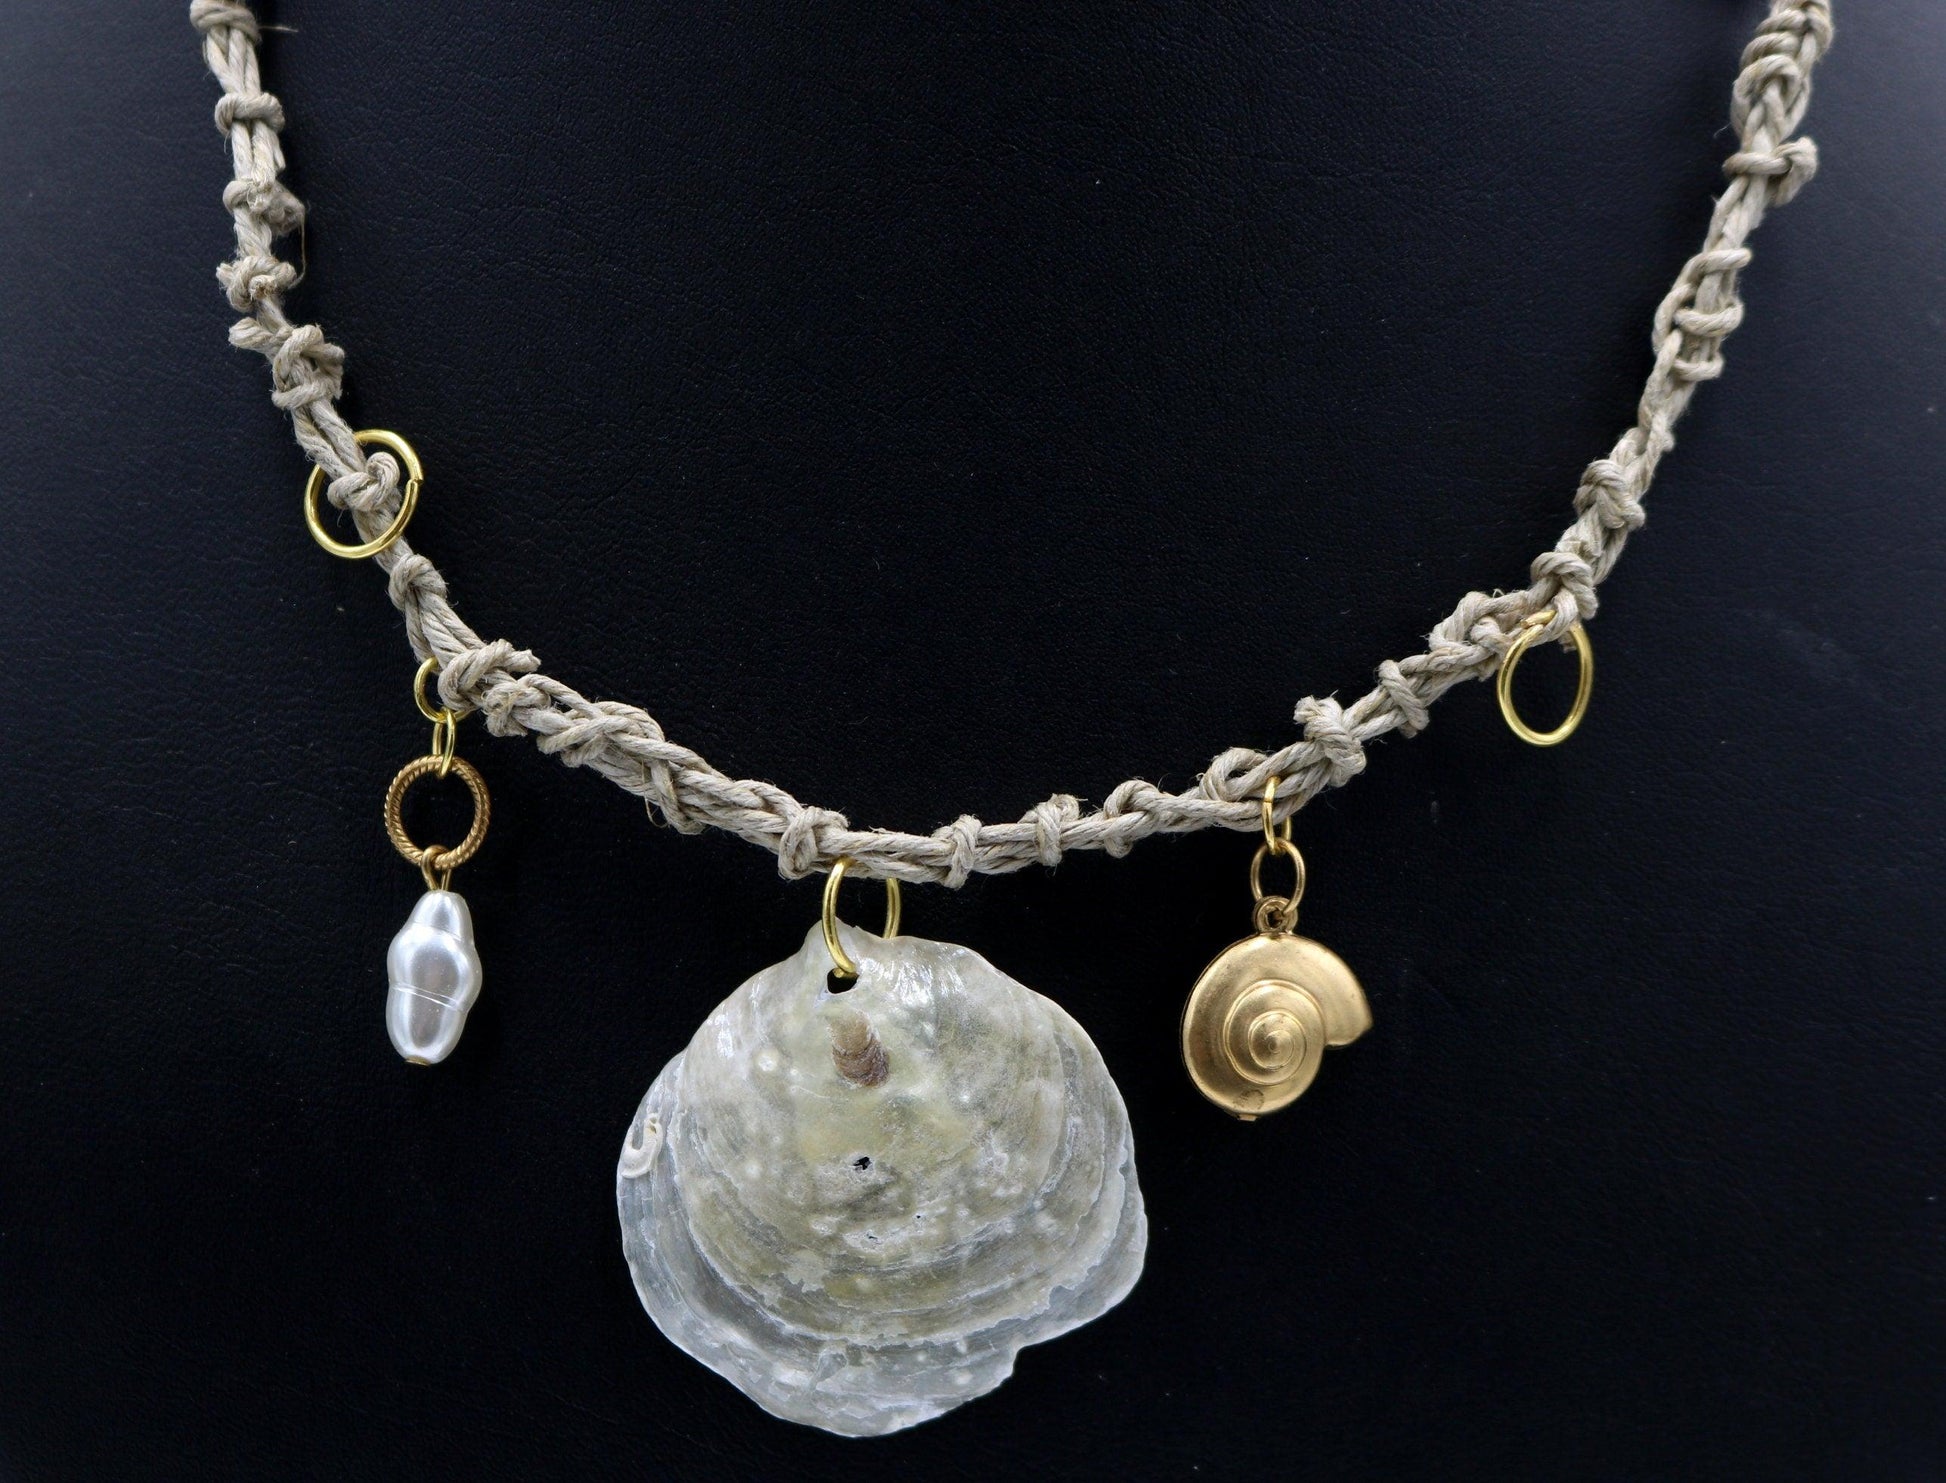 Unique One of a Kind Handmade Nautical Ocean Necklace Ship Wrecked Inspired Jingle Shell Florida Twine Necklace with Yellow Gold Toned Charm - Monkeysmojo